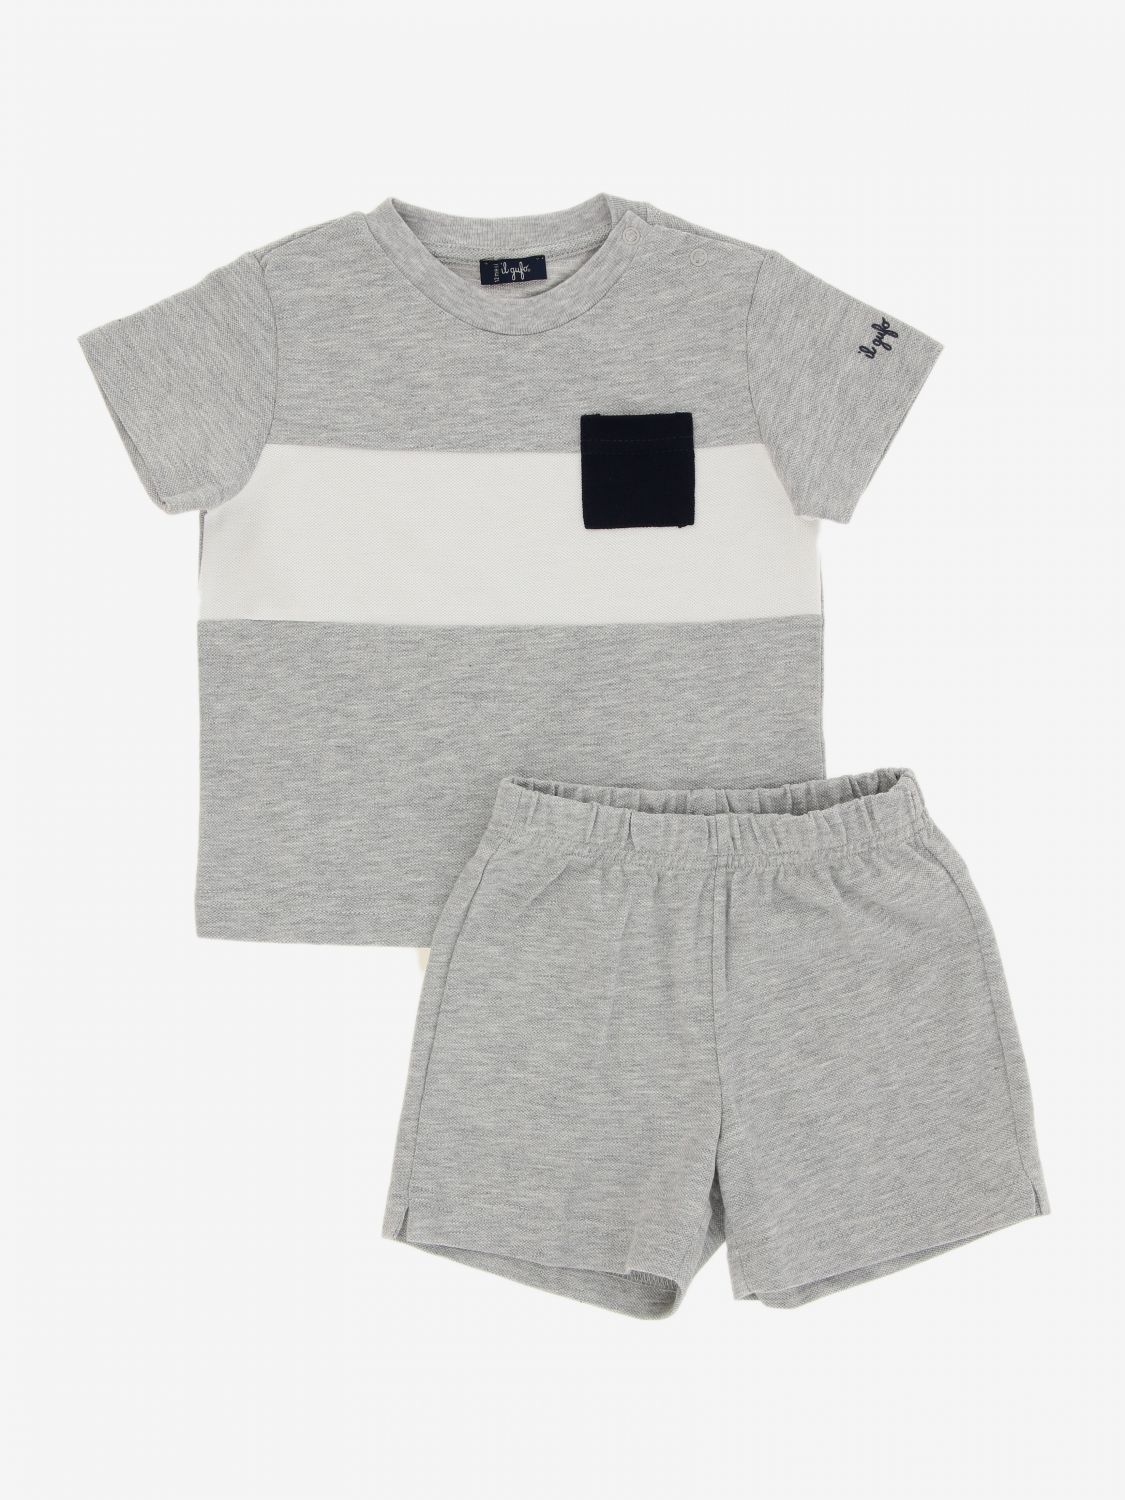 Il Gufo Outlet: t-shirt + bermuda shorts set with contrasts | Jumpsuit ...